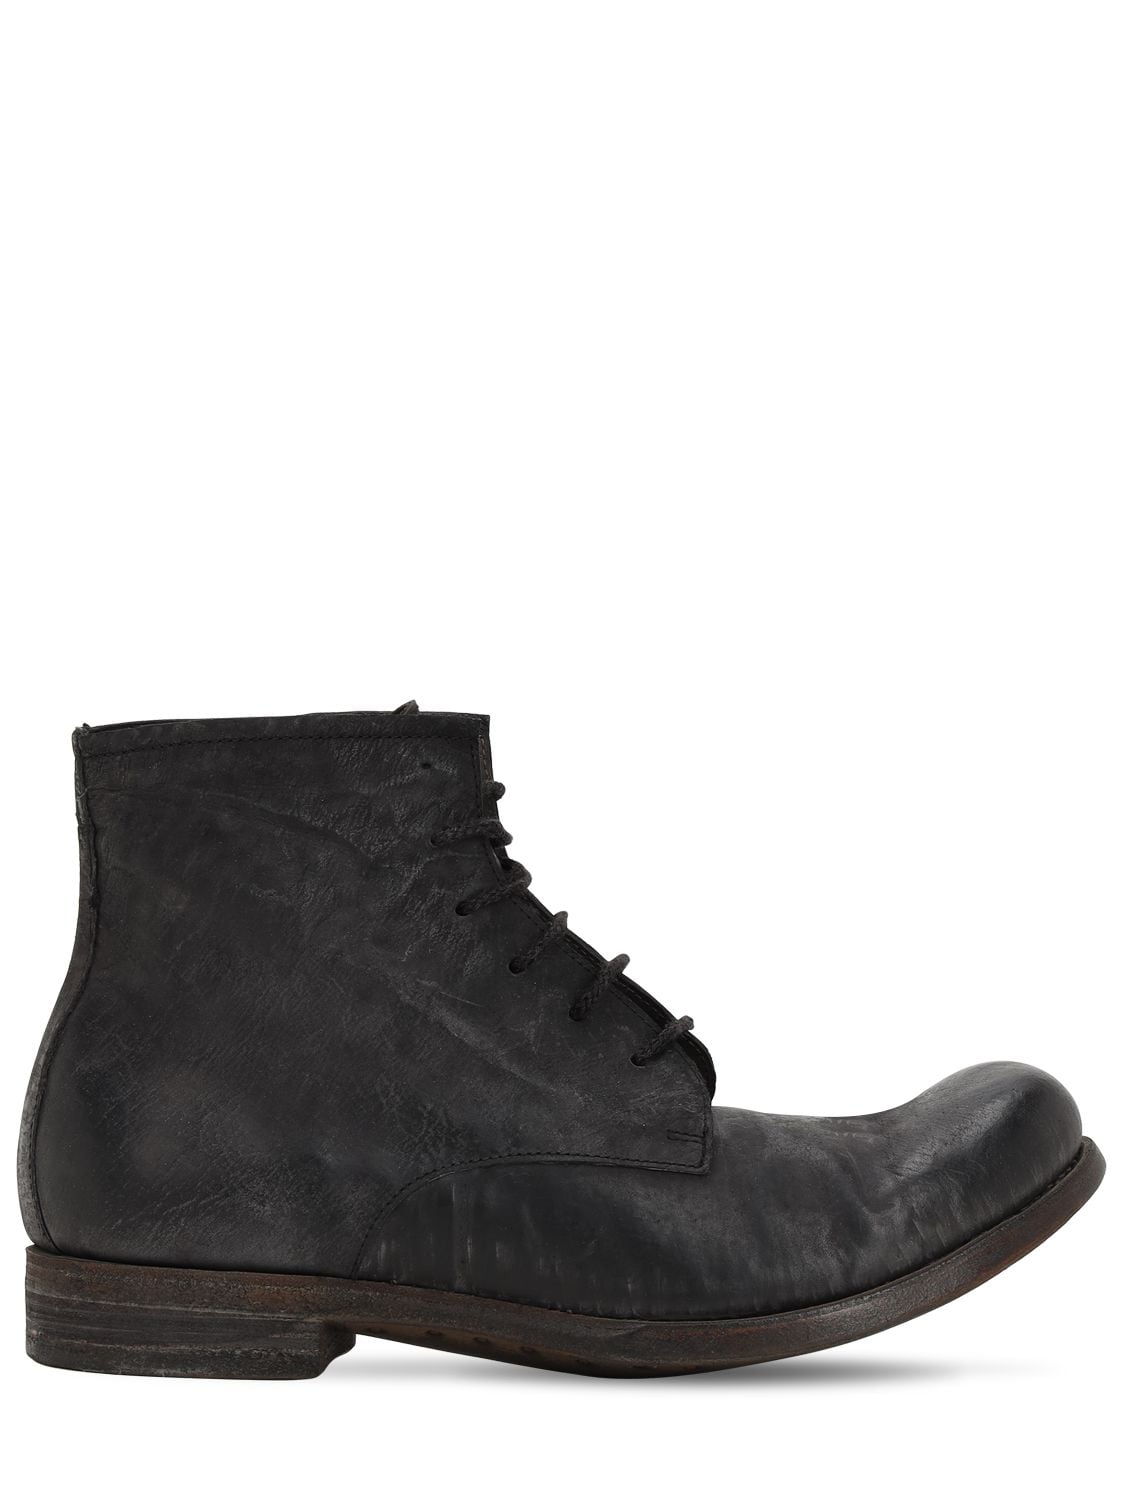 Adiciannoveventitre Handmade Leather Lace-up Boots In Black